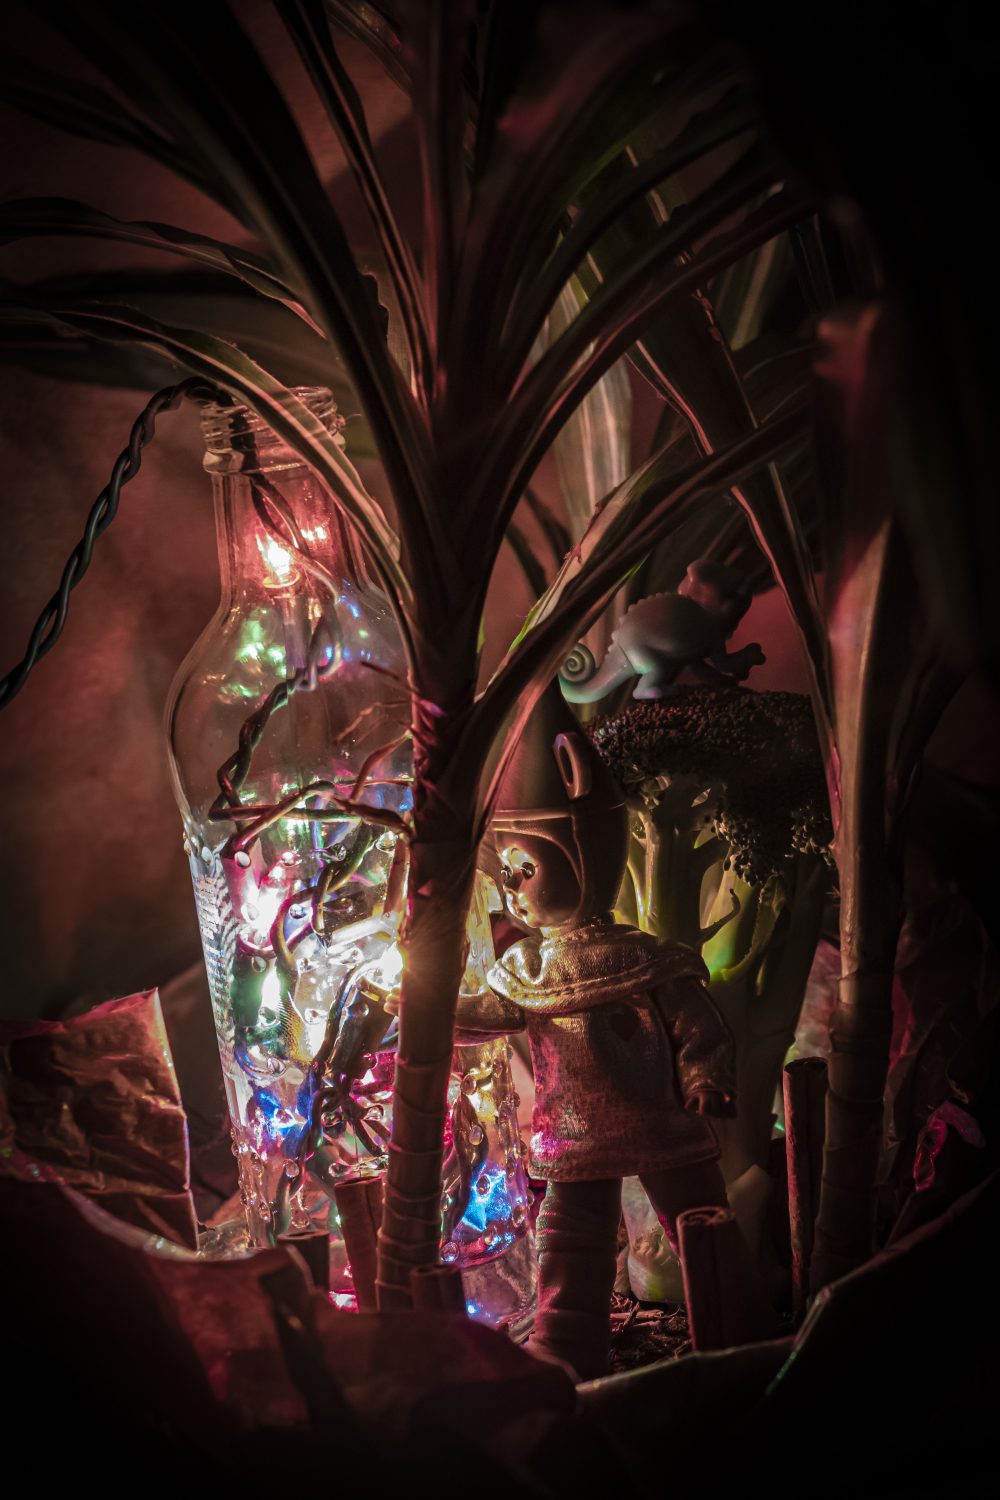 A constructed photo displaying a doll inside of a potted plant with all sorts of random objects like broccoli, cinnamon sticks, another objects that might not be seen in frame. The lighting of the image is used from rainbow Christmas lights in a glass bottle.